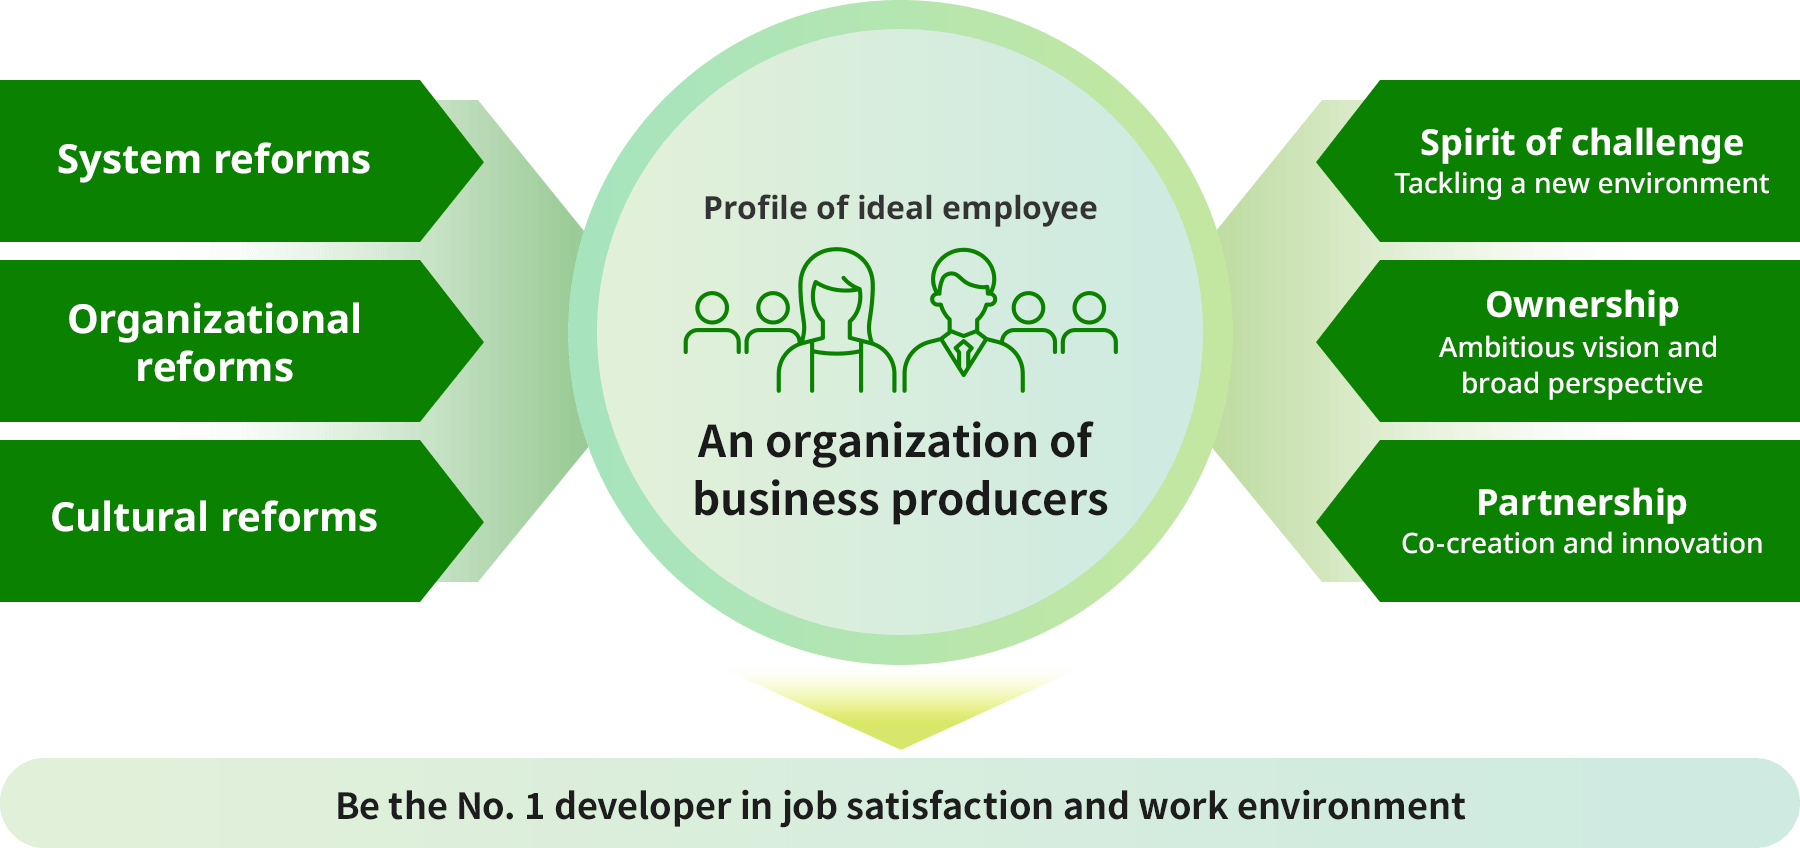 Profile of ideal employee An organization of business producers: System reforms・Organizational reforms・Cultural reforms、Spirit of challenge Tackling a new environment Ownership Ambitious vision and broad perspective Partnership Co-creation and innovation Be the No. 1 developer in job satisfaction and work environment